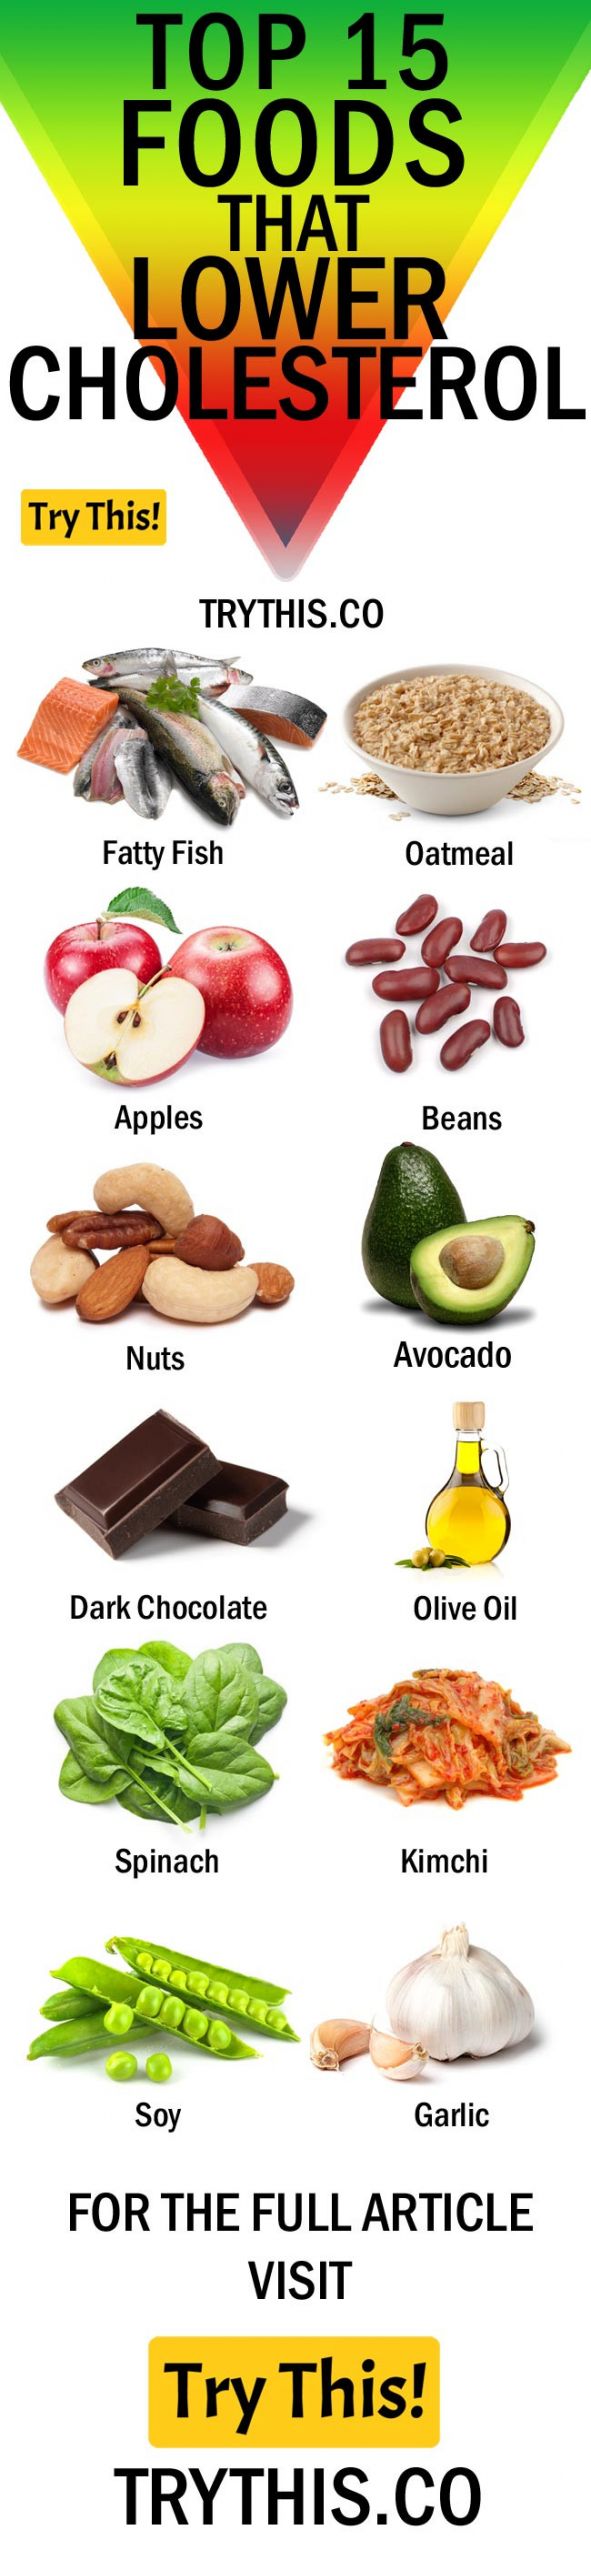 Healthy Low Cholesterol Snacks
 Top 15 Foods That Lower Cholesterol Health Tips Try This